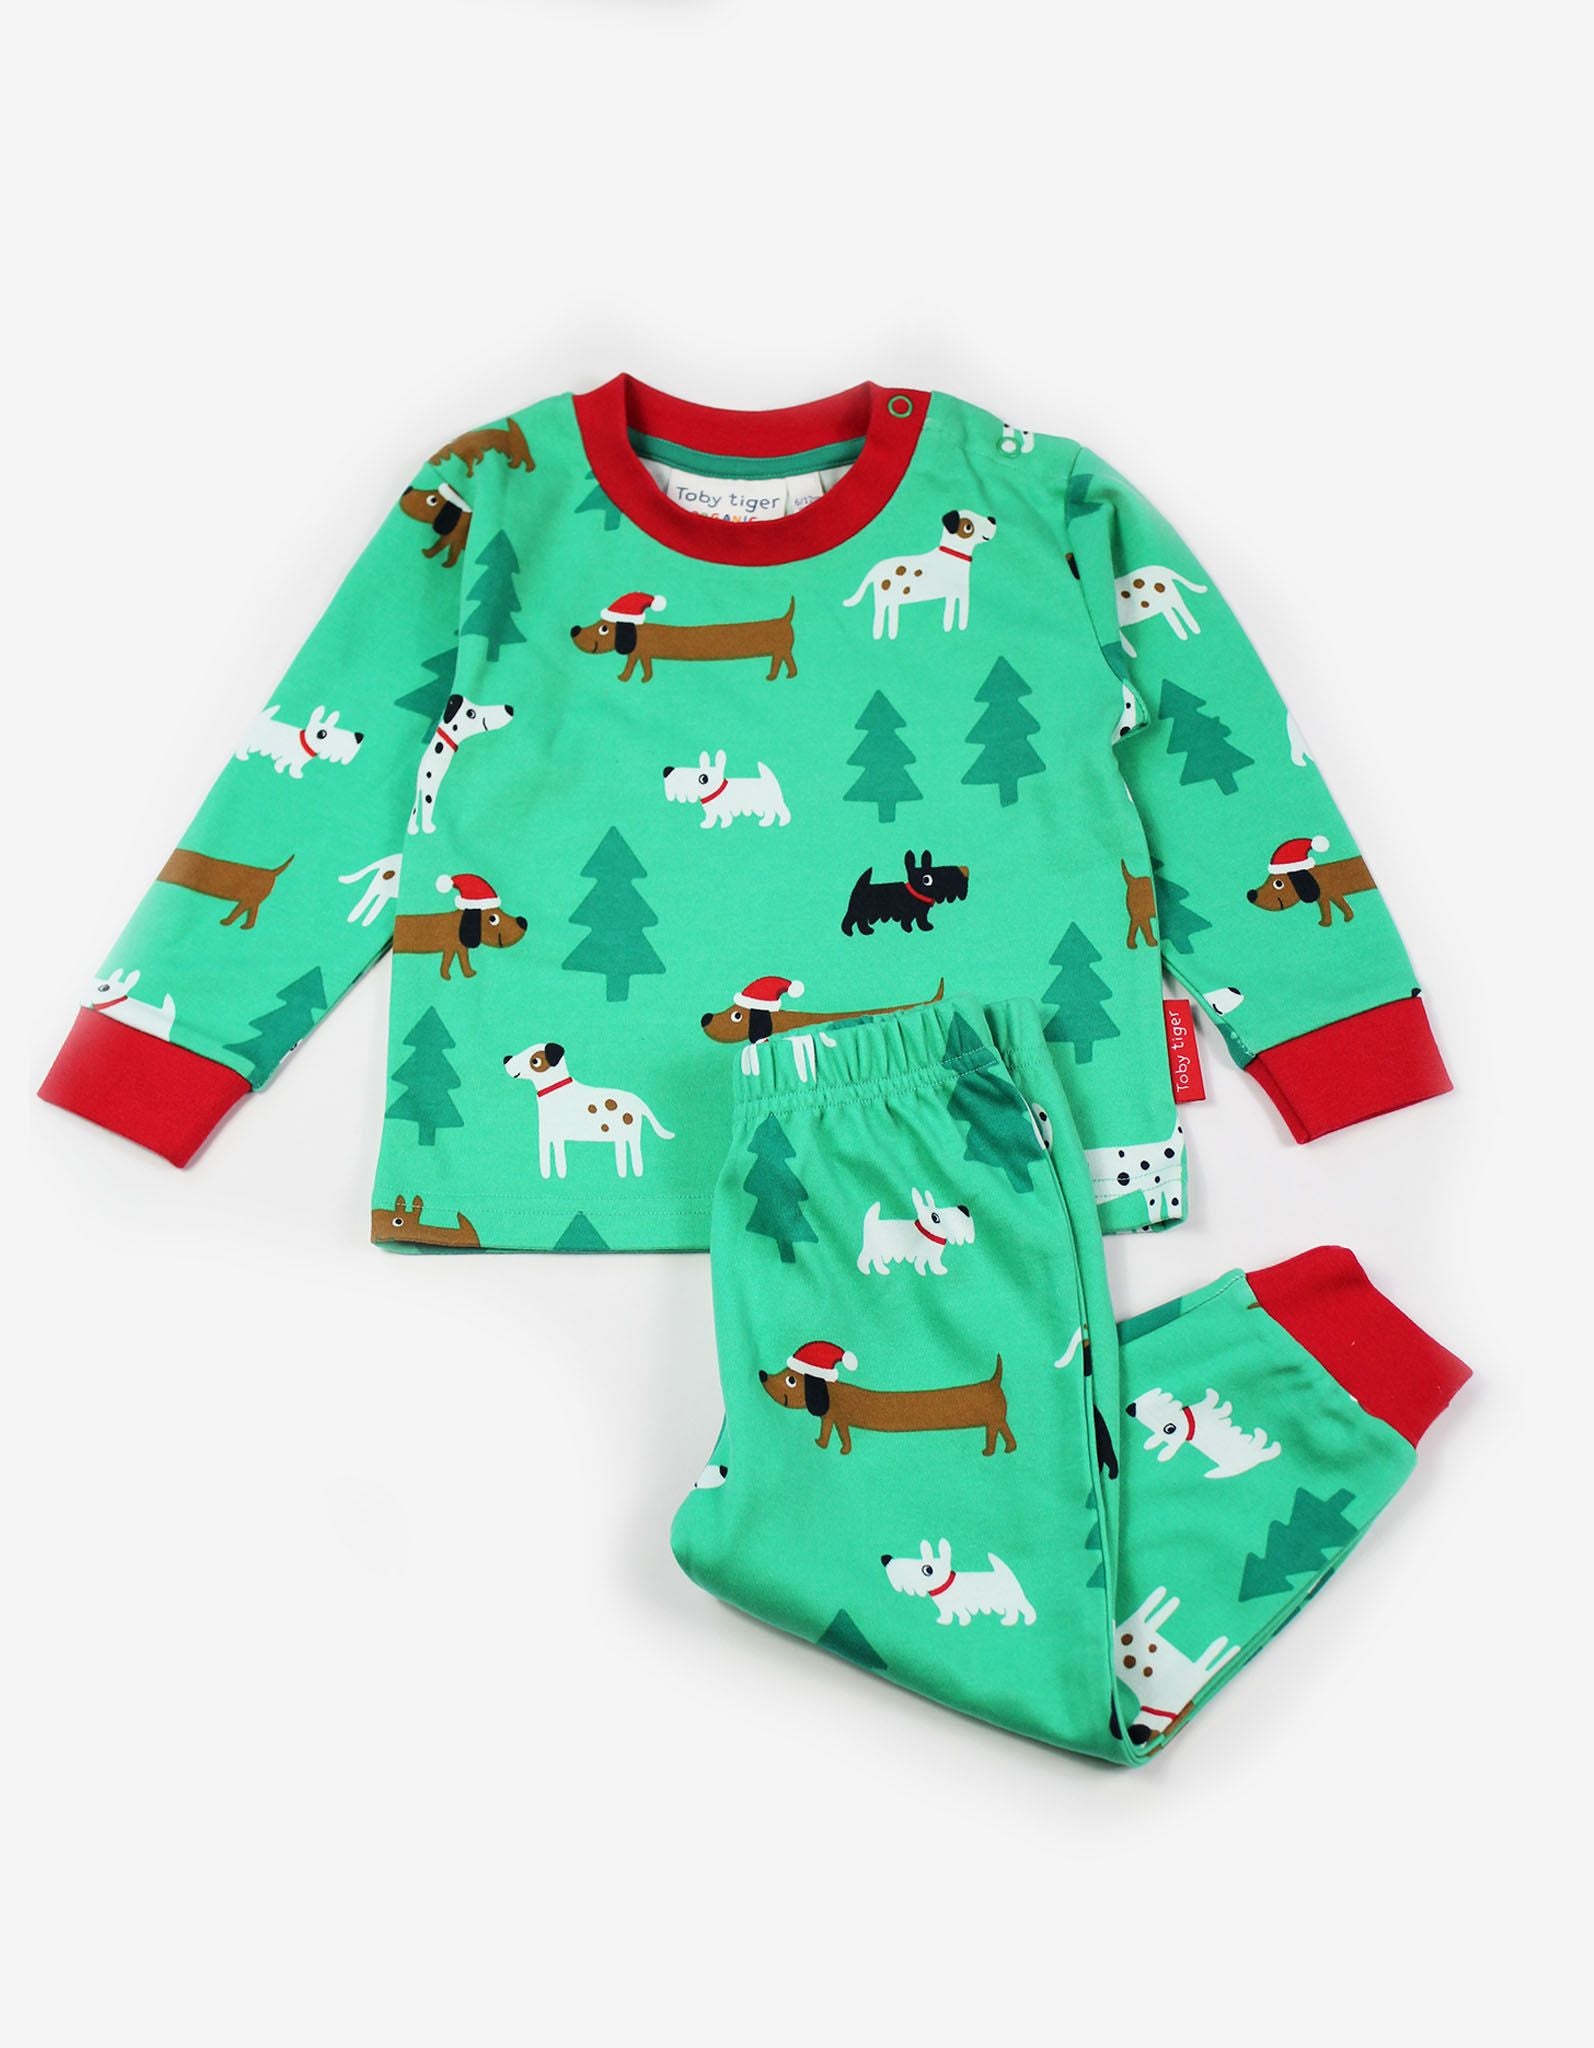 toby tiger organic christmas pyjamas at whippersnappersonline